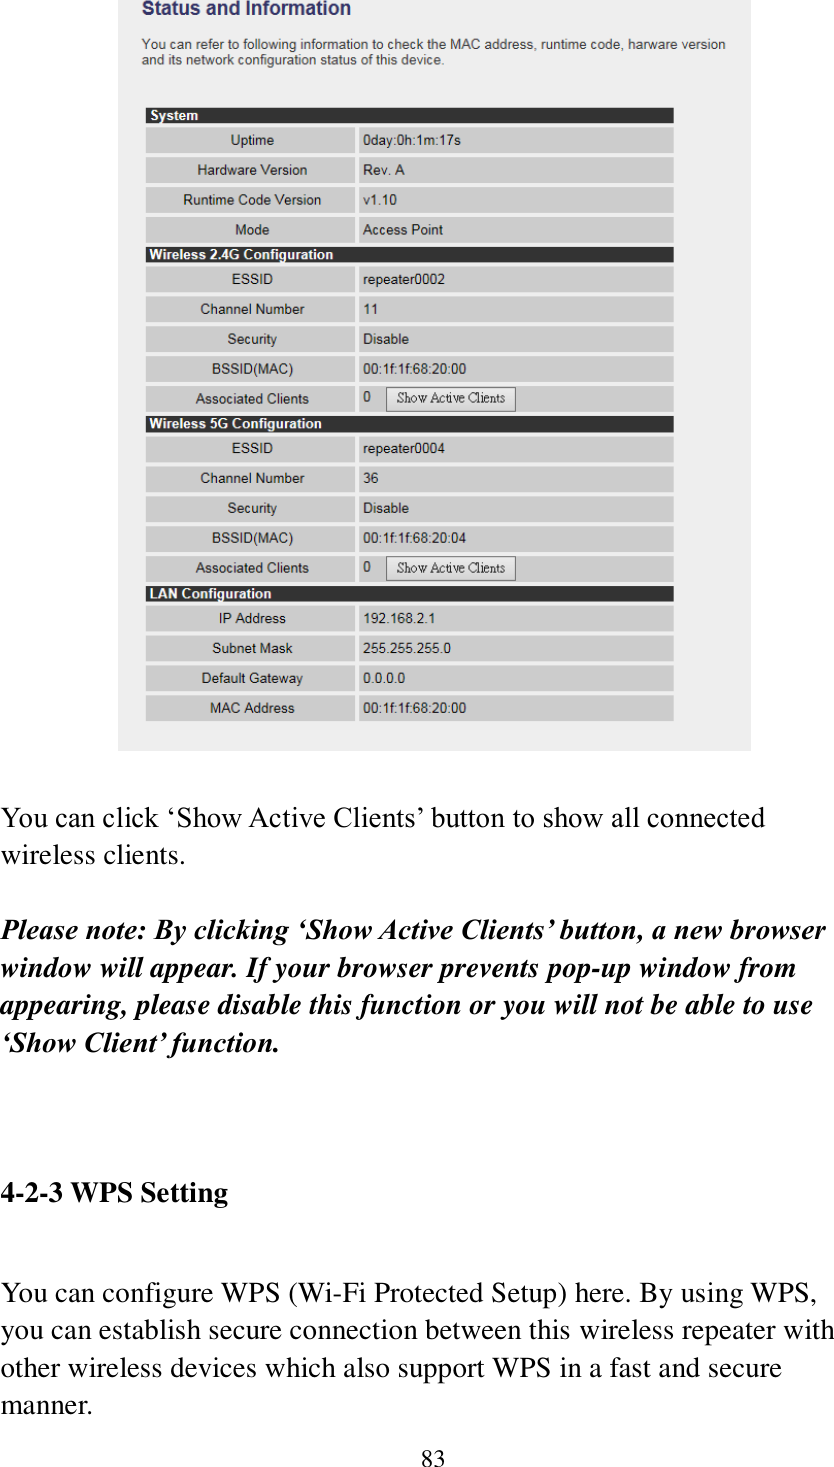 83   You can click ‘Show Active Clients’ button to show all connected wireless clients.  Please note: By clicking ‘Show Active Clients’ button, a new browser window will appear. If your browser prevents pop-up window from appearing, please disable this function or you will not be able to use ‘Show Client’ function.    4-2-3 WPS Setting  You can configure WPS (Wi-Fi Protected Setup) here. By using WPS, you can establish secure connection between this wireless repeater with other wireless devices which also support WPS in a fast and secure manner. 